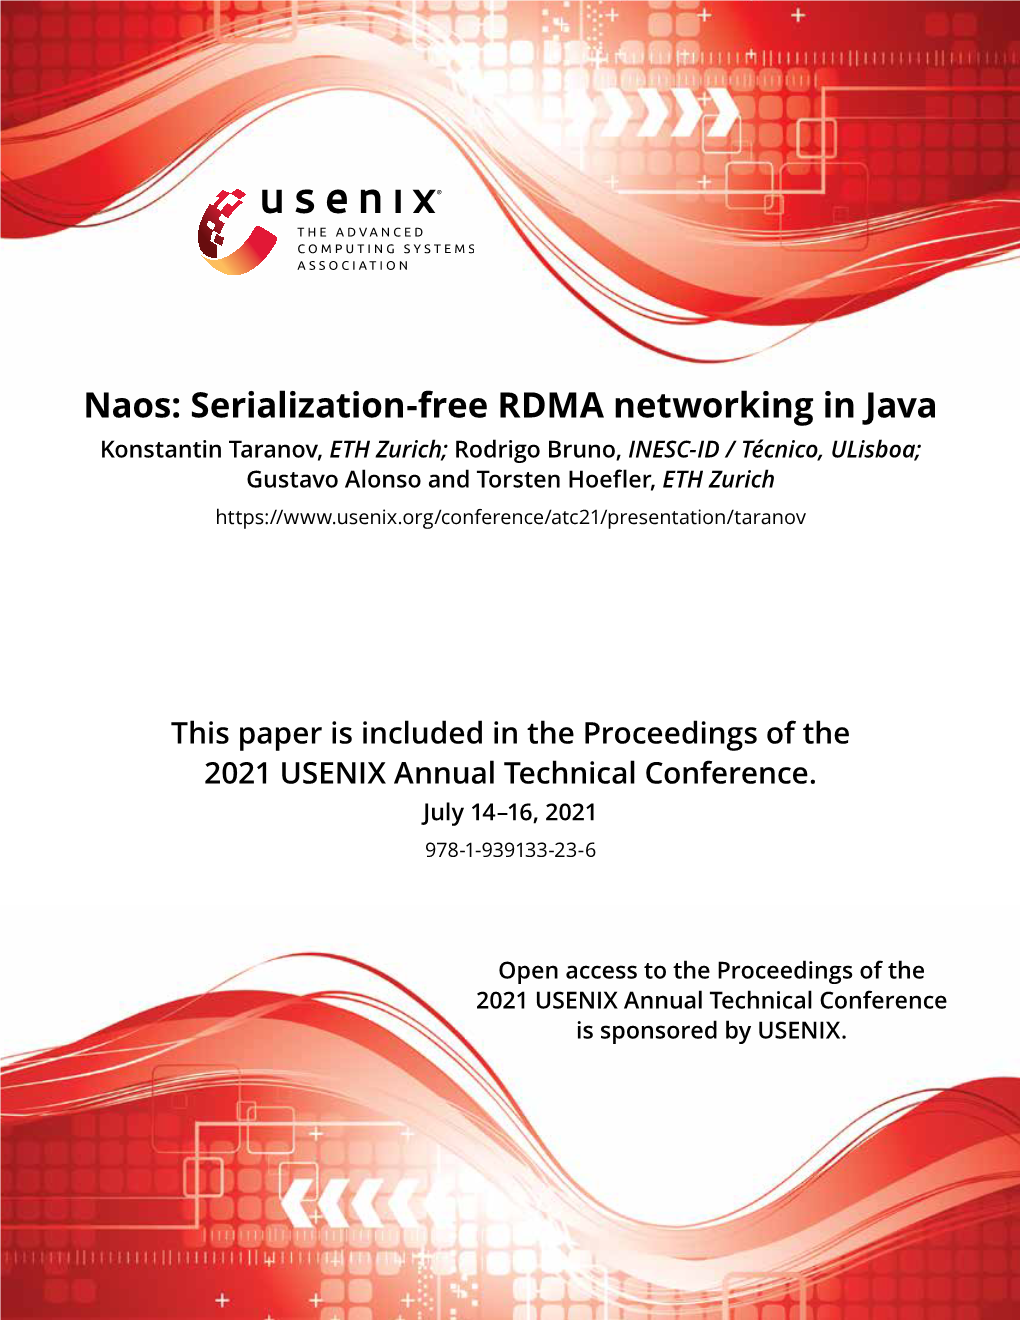 Naos: Serialization-Free RDMA Networking in Java